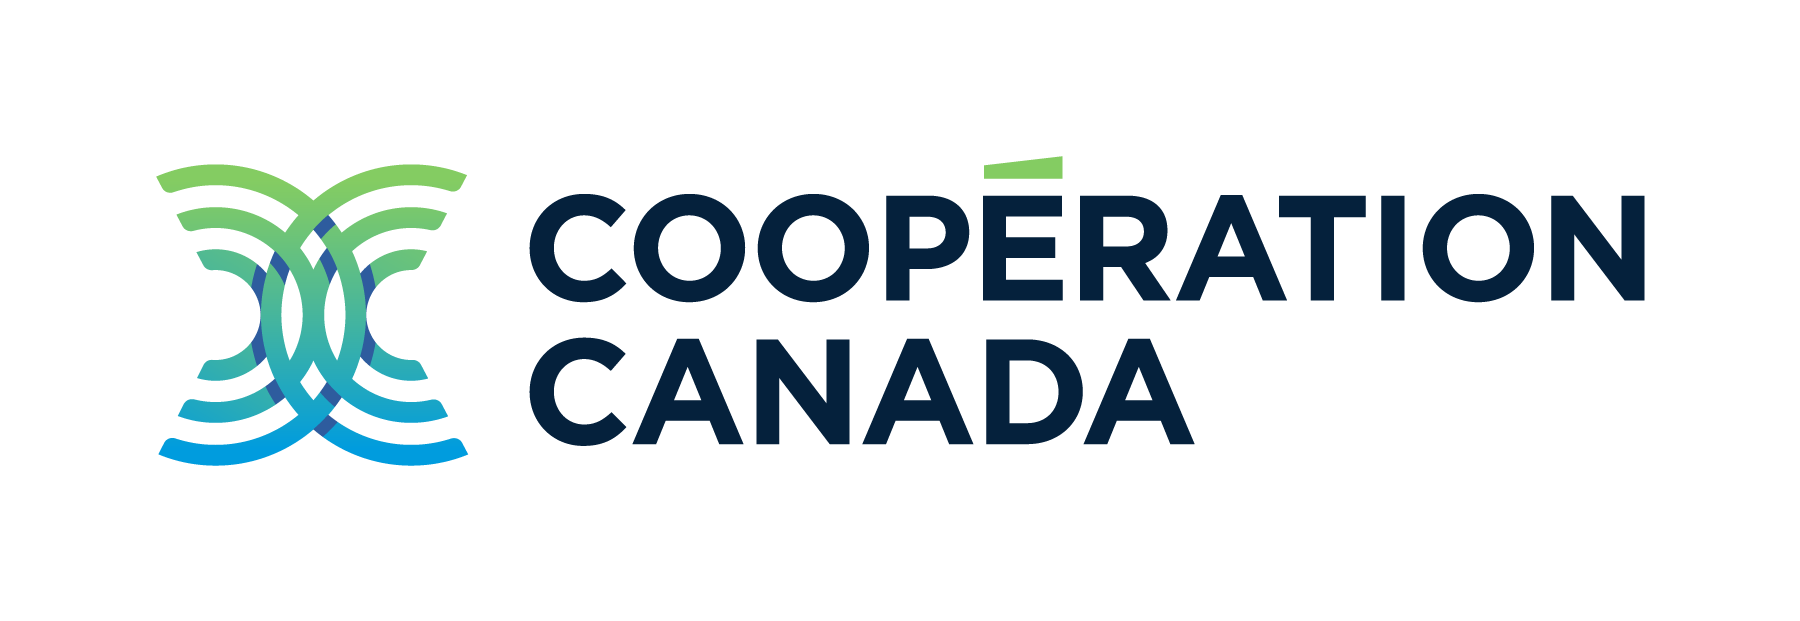 Cooperation Canada logo for light background